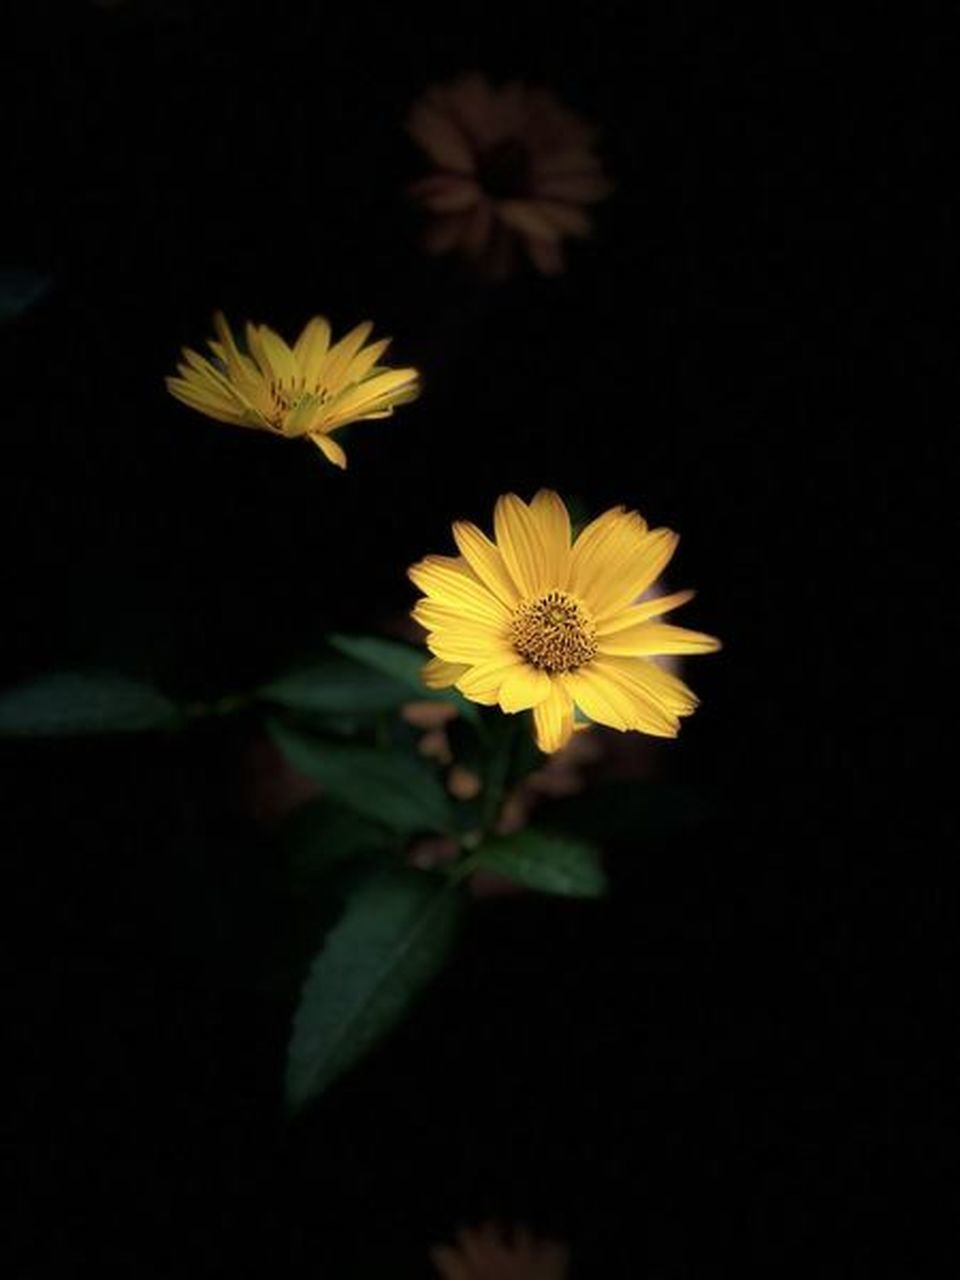 CLOSE-UP OF YELLOW FLOWERS AGAINST BLACK BACKGROUND